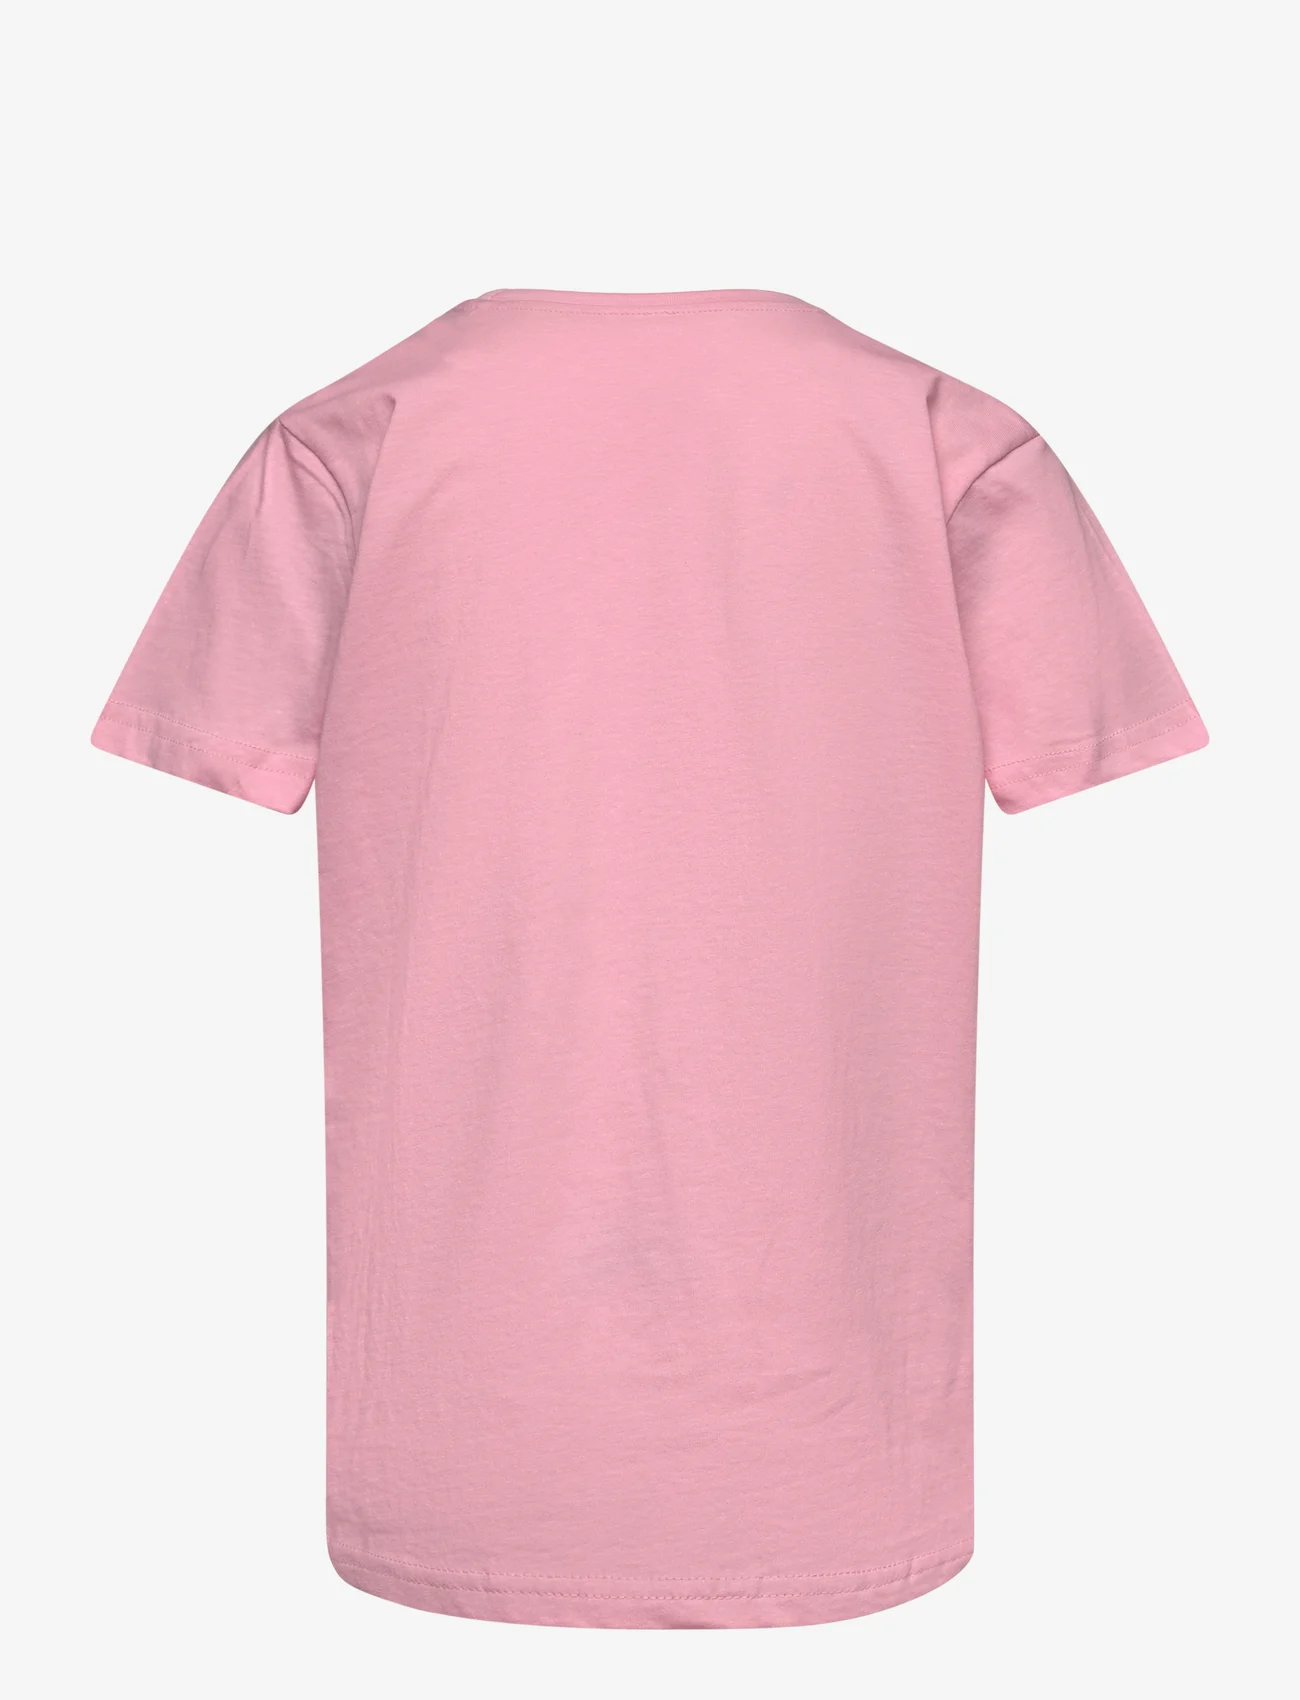 ZigZag - Story SS T-Shirt - lyhythihaiset t-paidat - orchid pink - 1